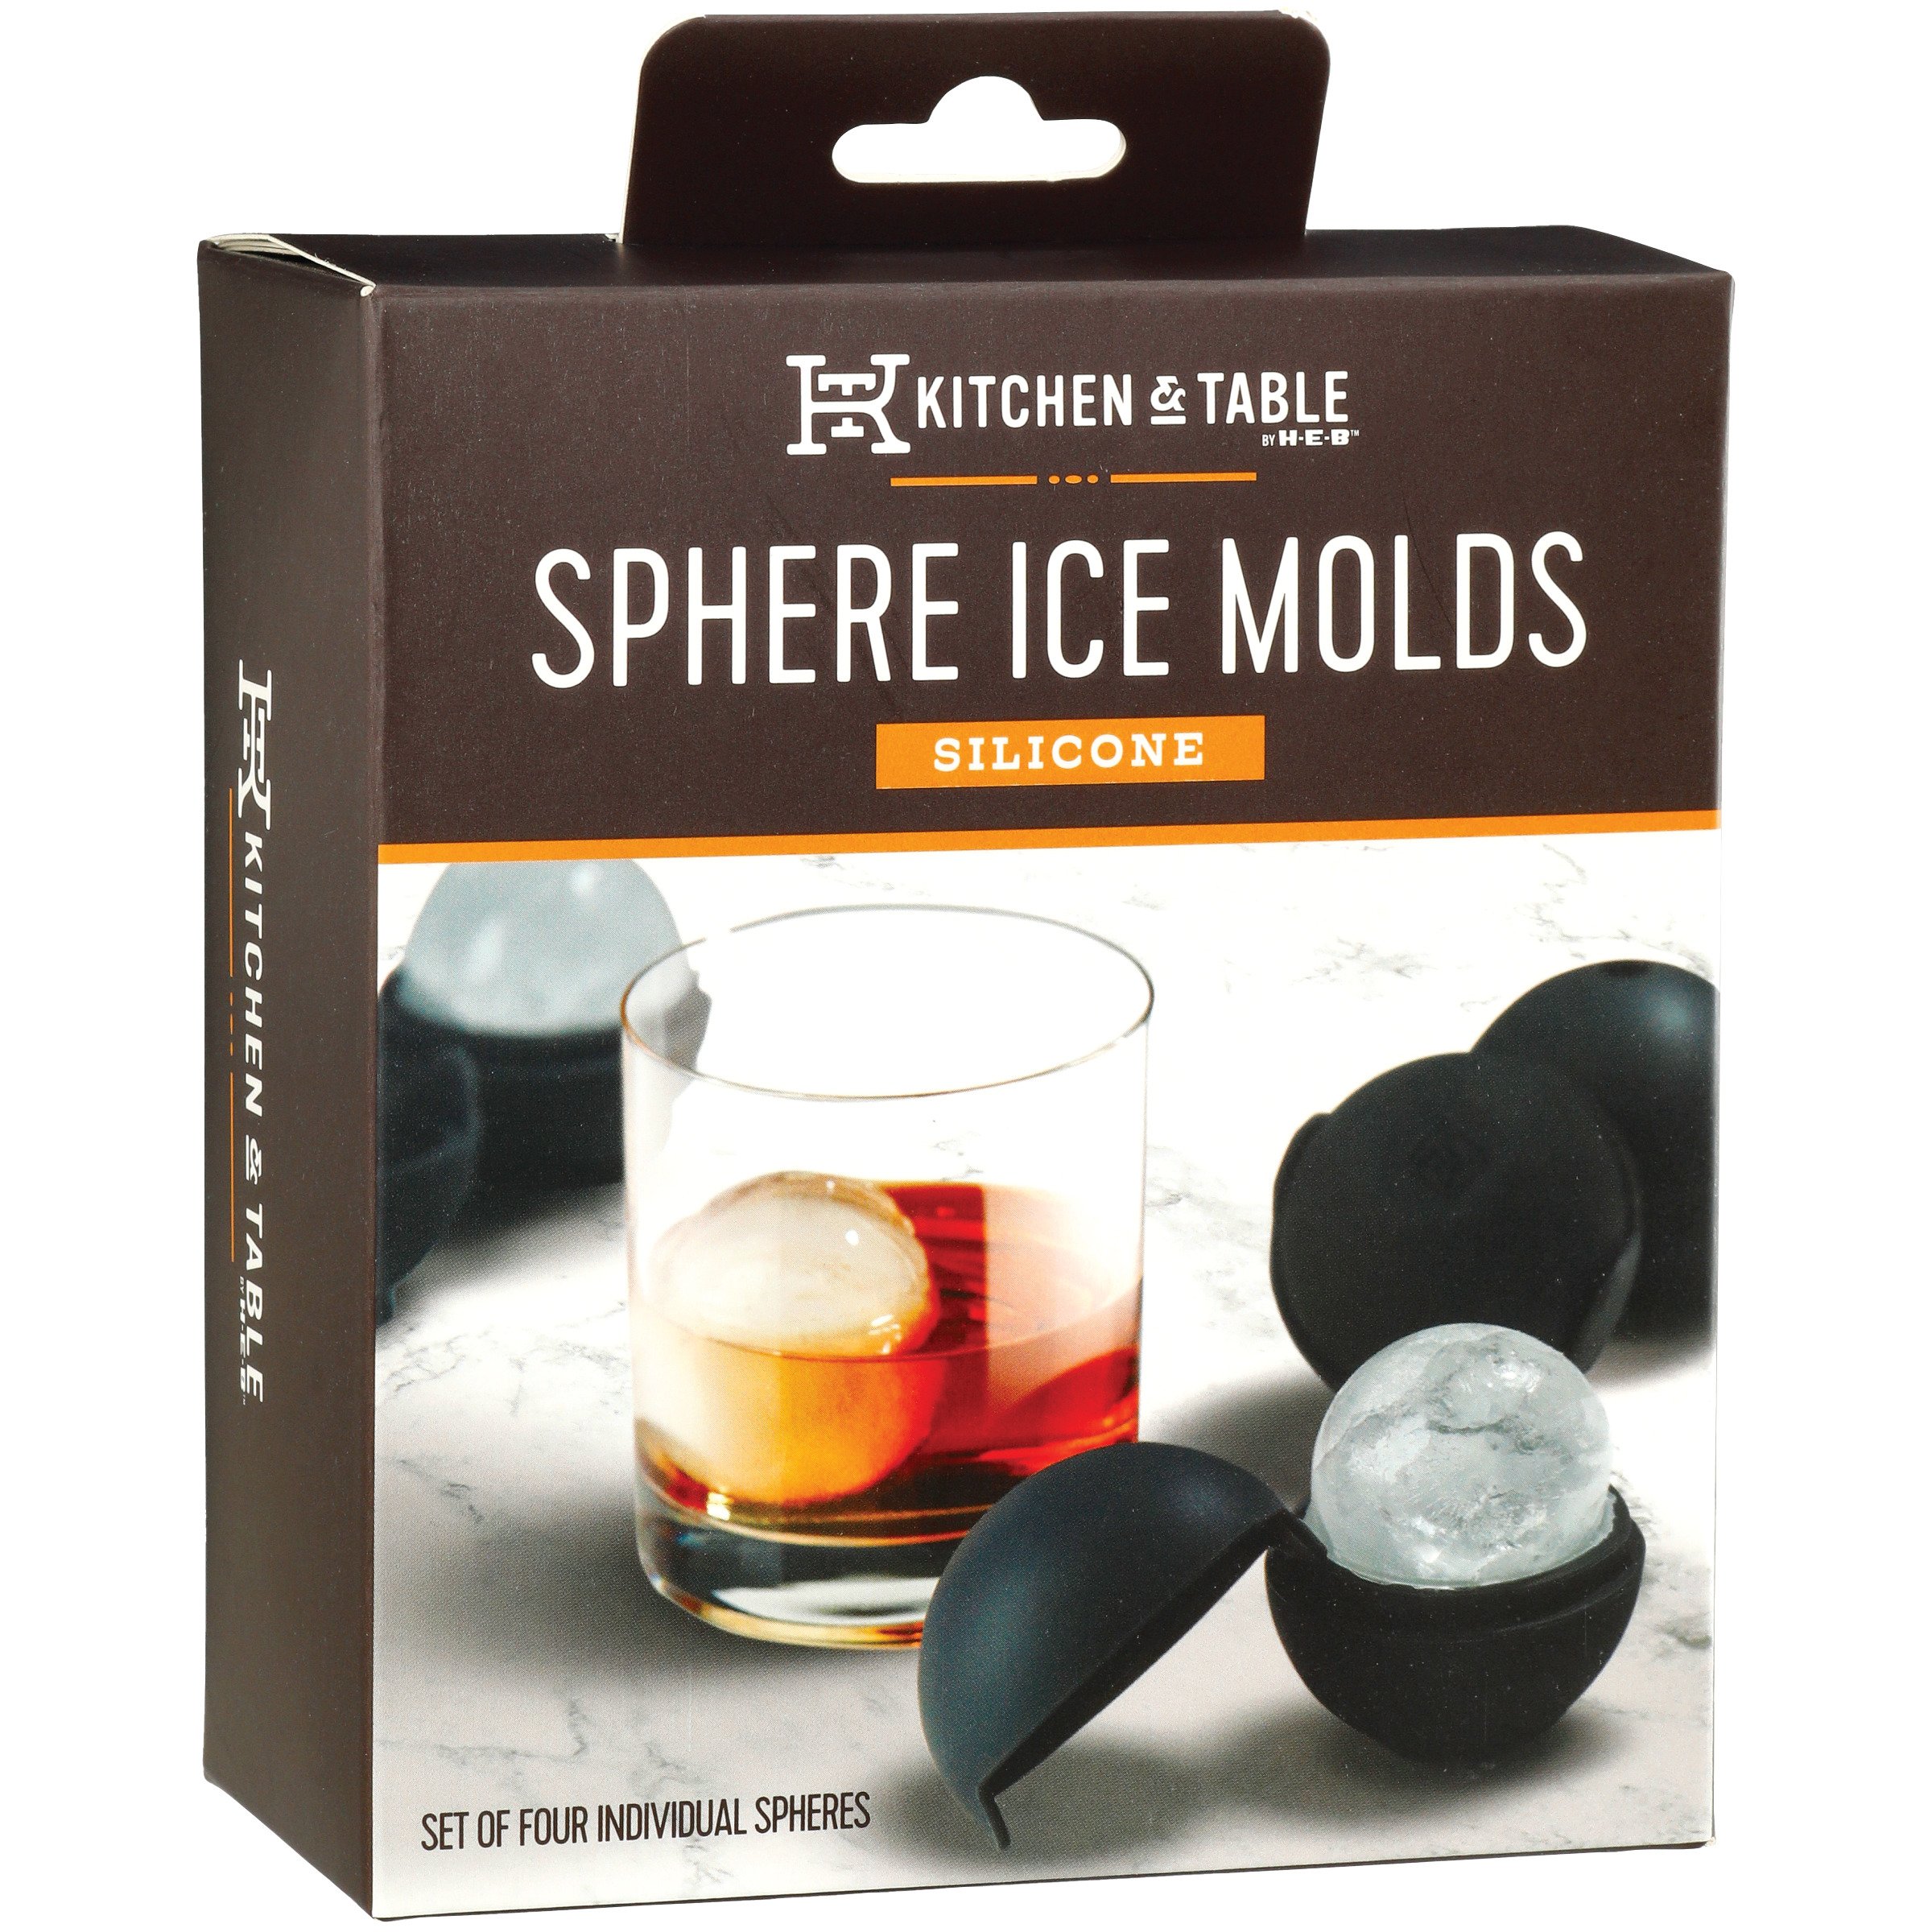 Kitchen & Table by H-E-B Silicone Sphere Ice Molds - Black